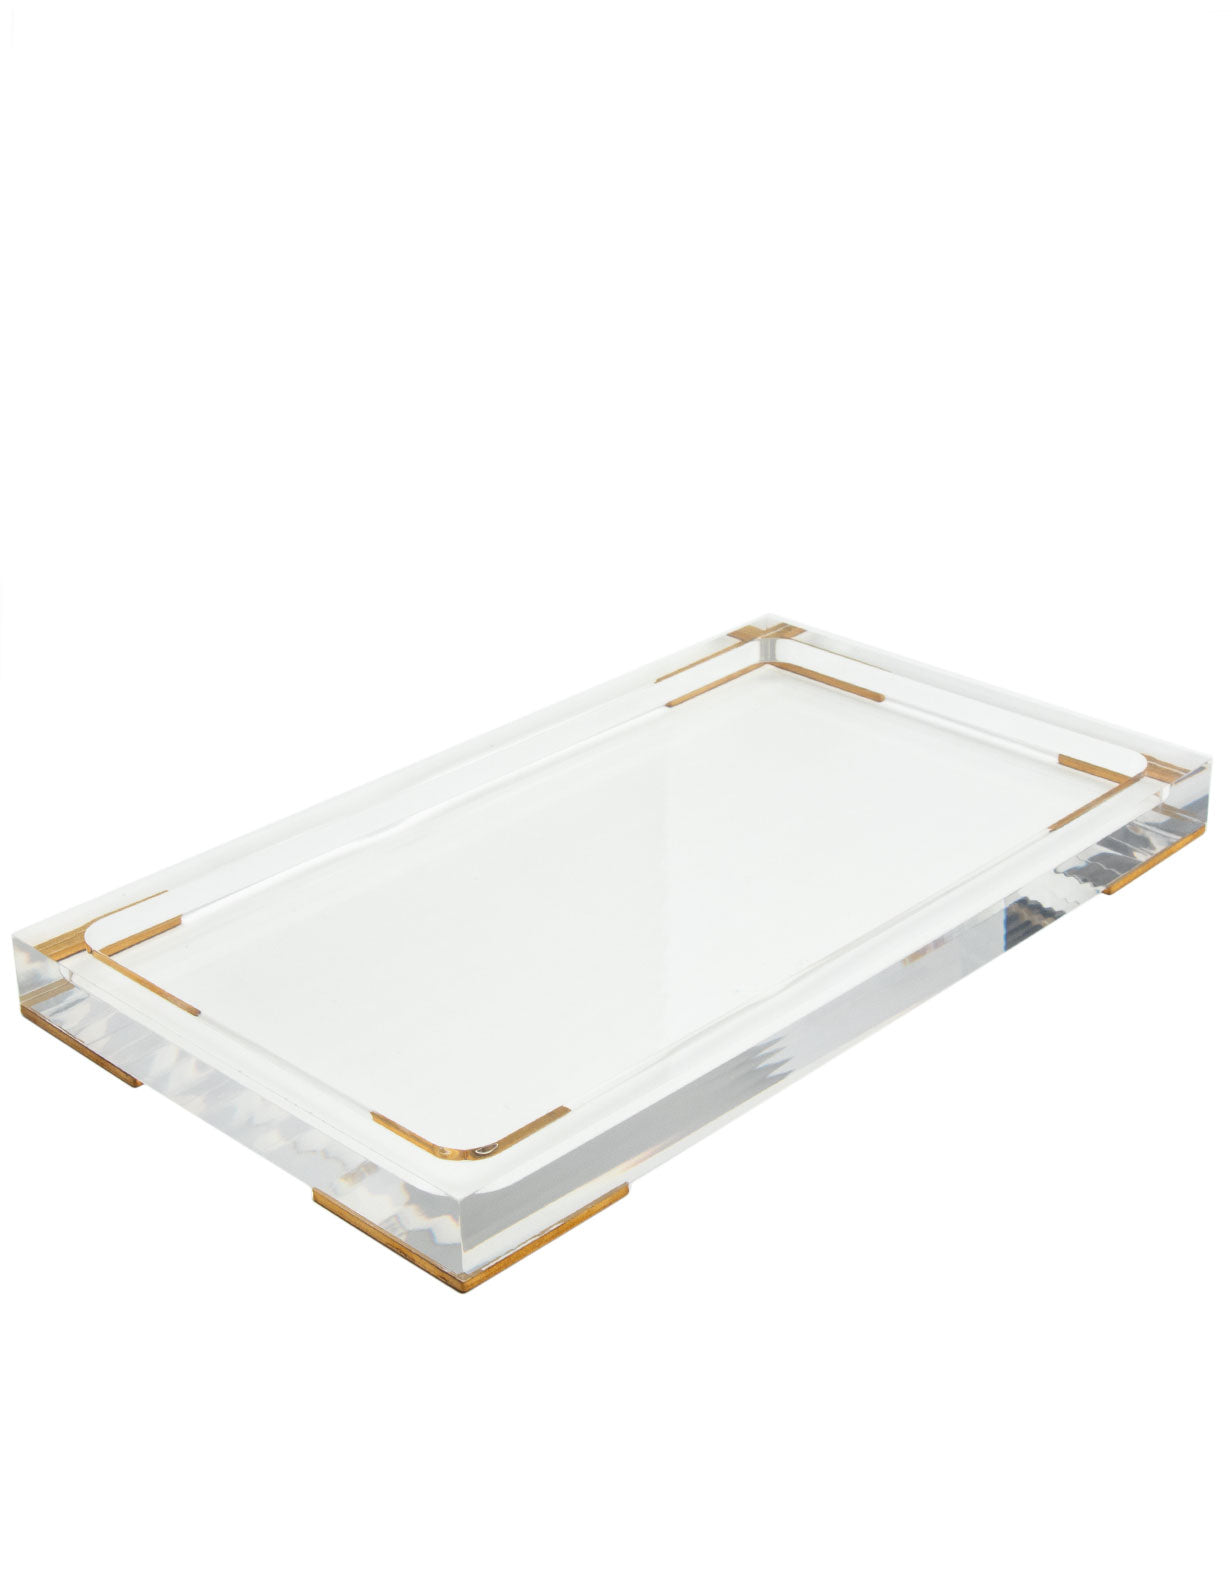 Large Acrylic Tray for Home & Body